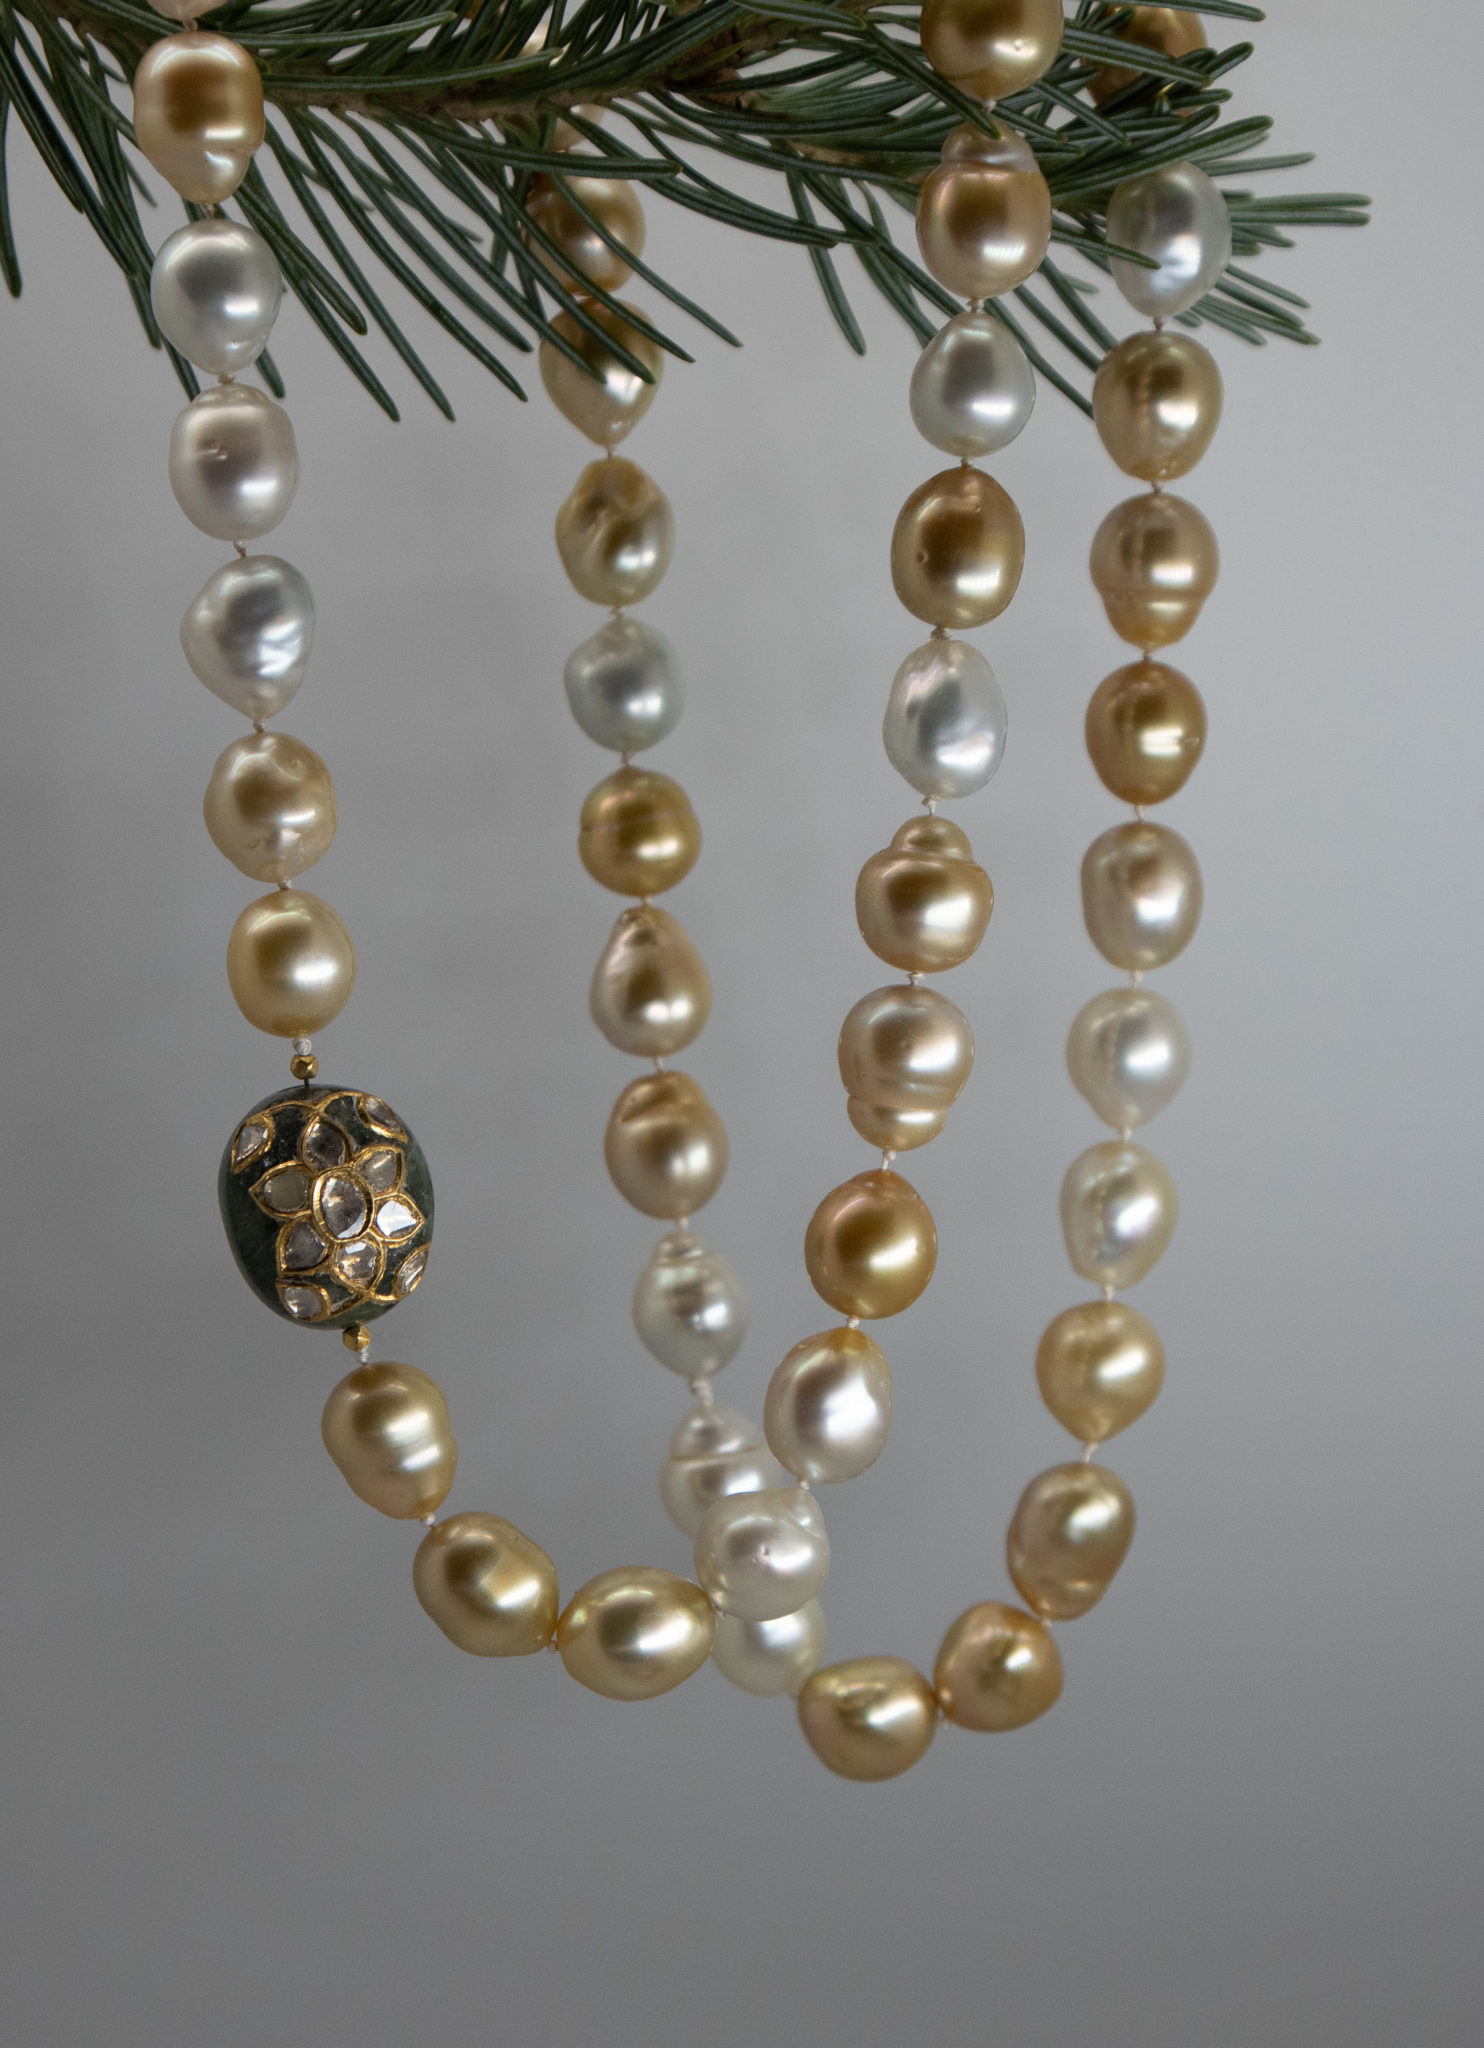 Closeup of Philippine Golden South Sea Pearls with Emerald bead clasp